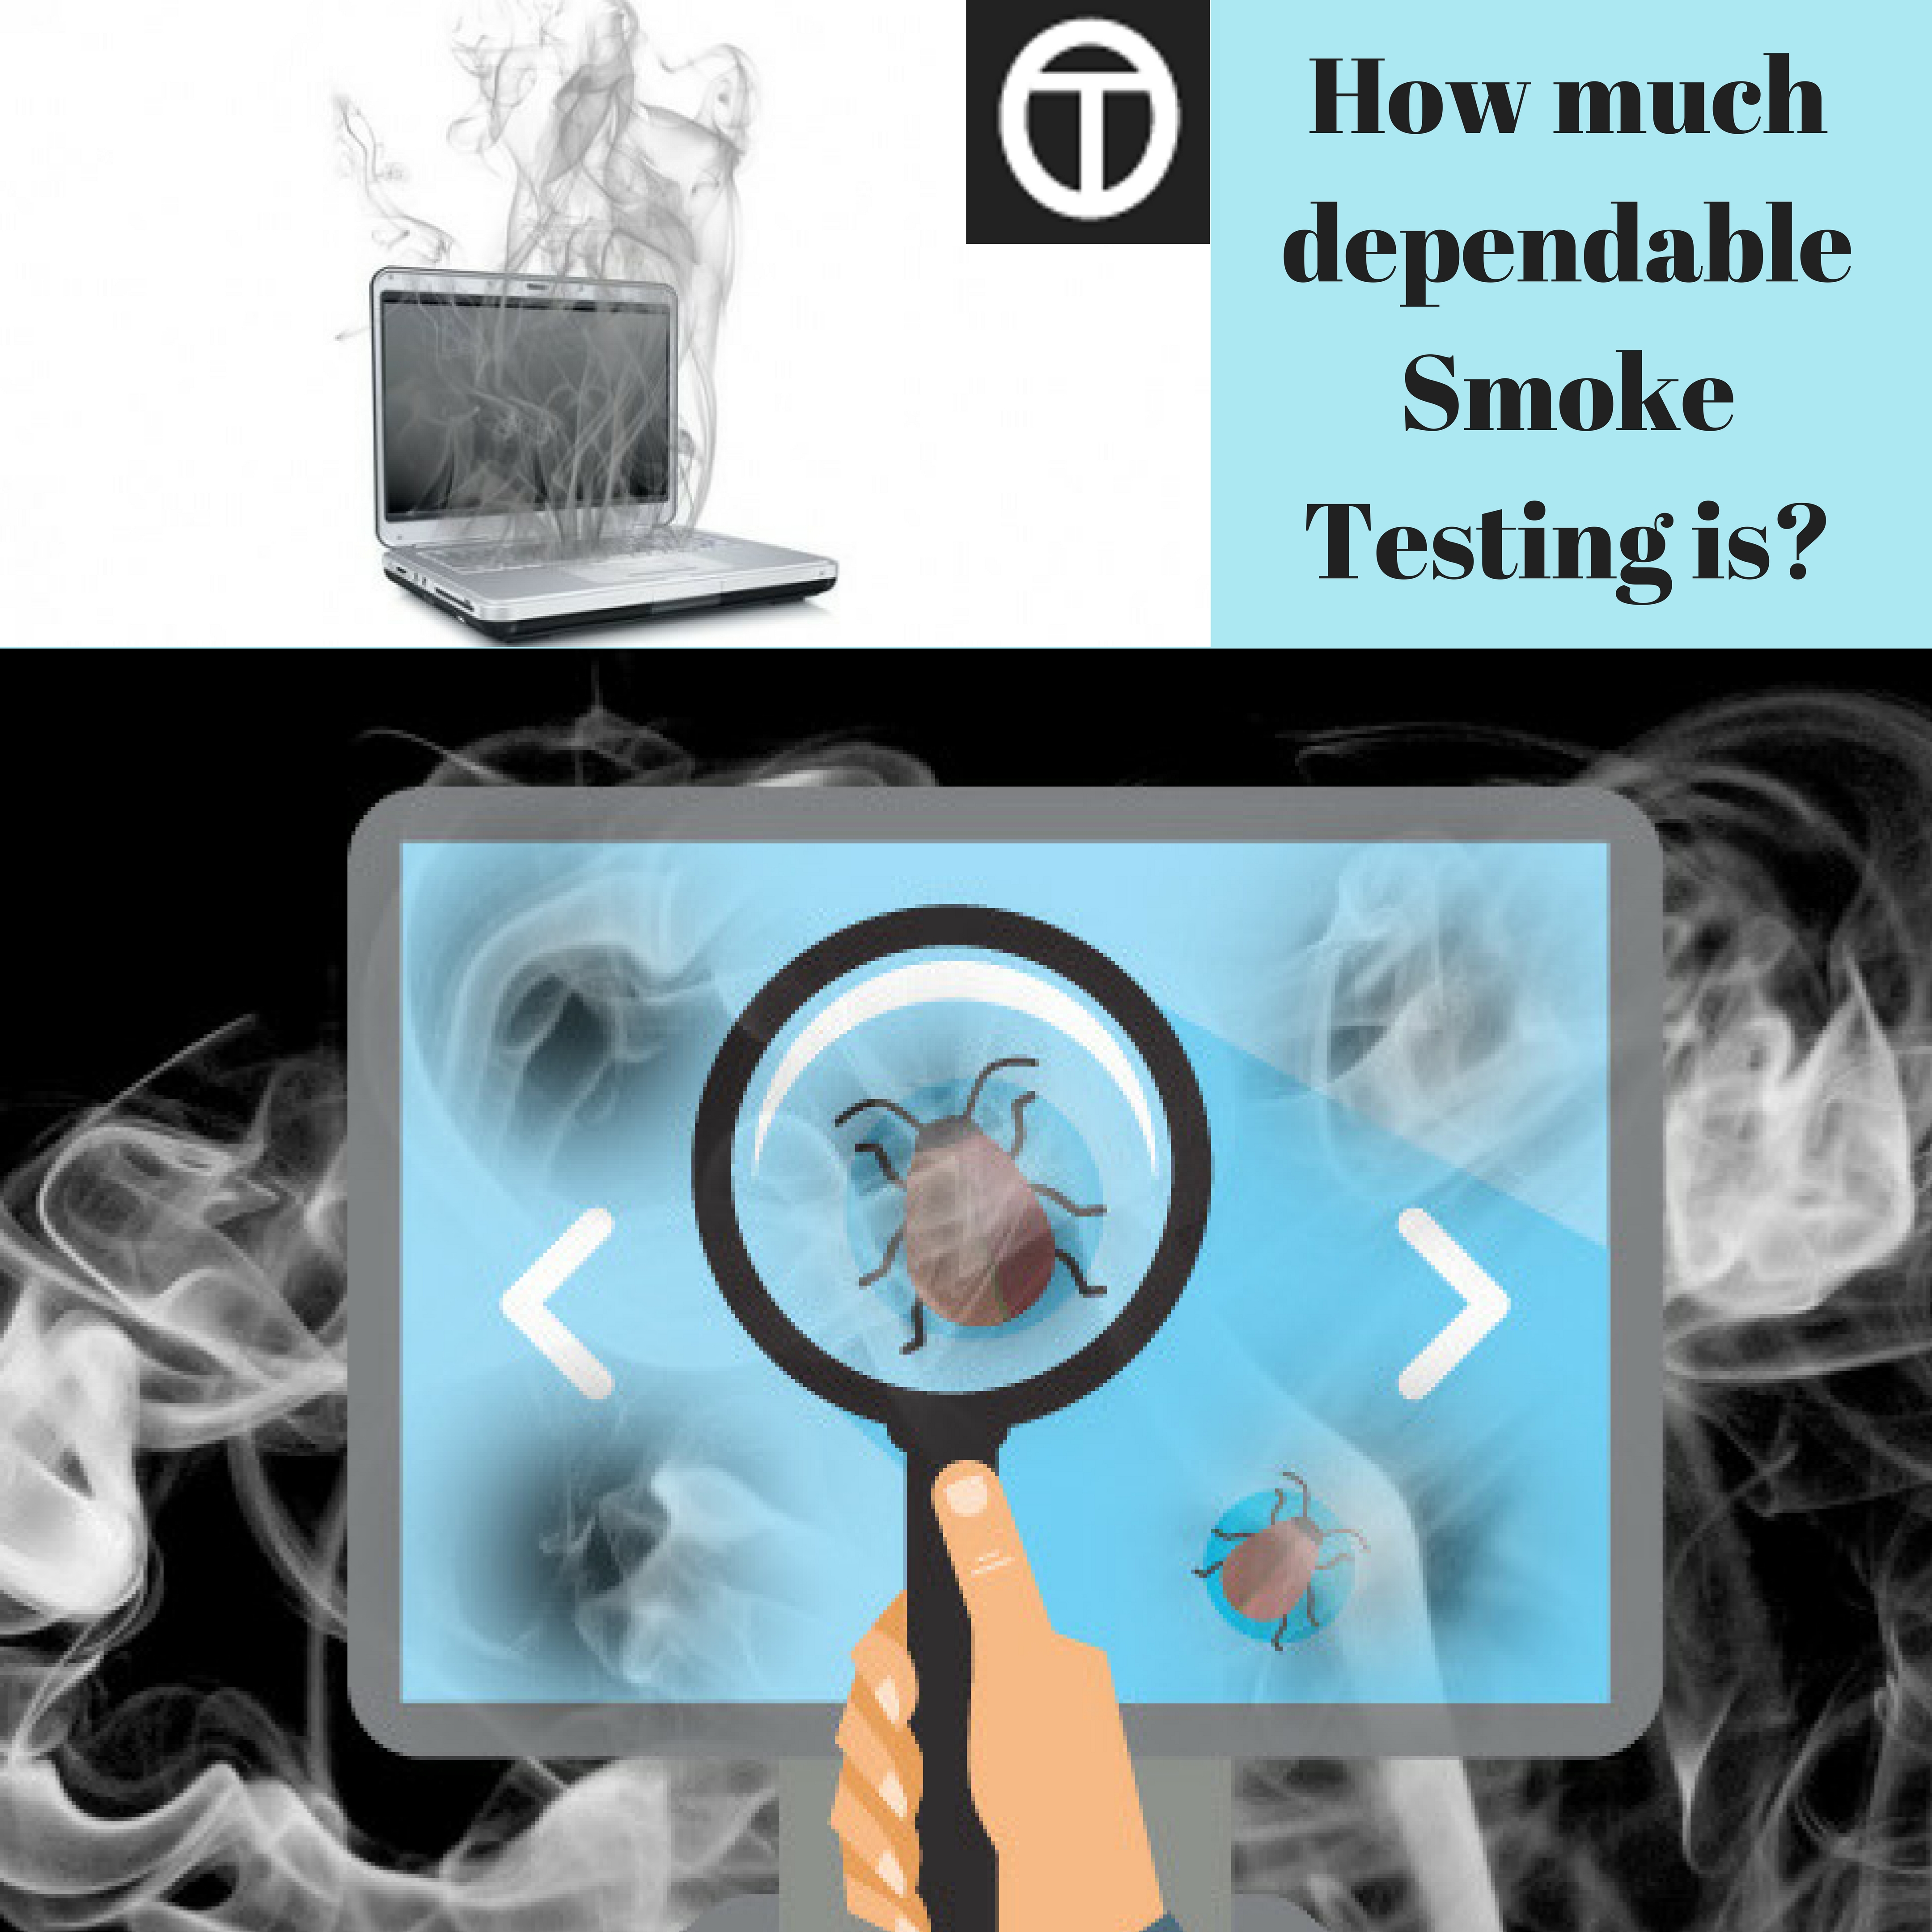 How much dependable Smoke Testing is?